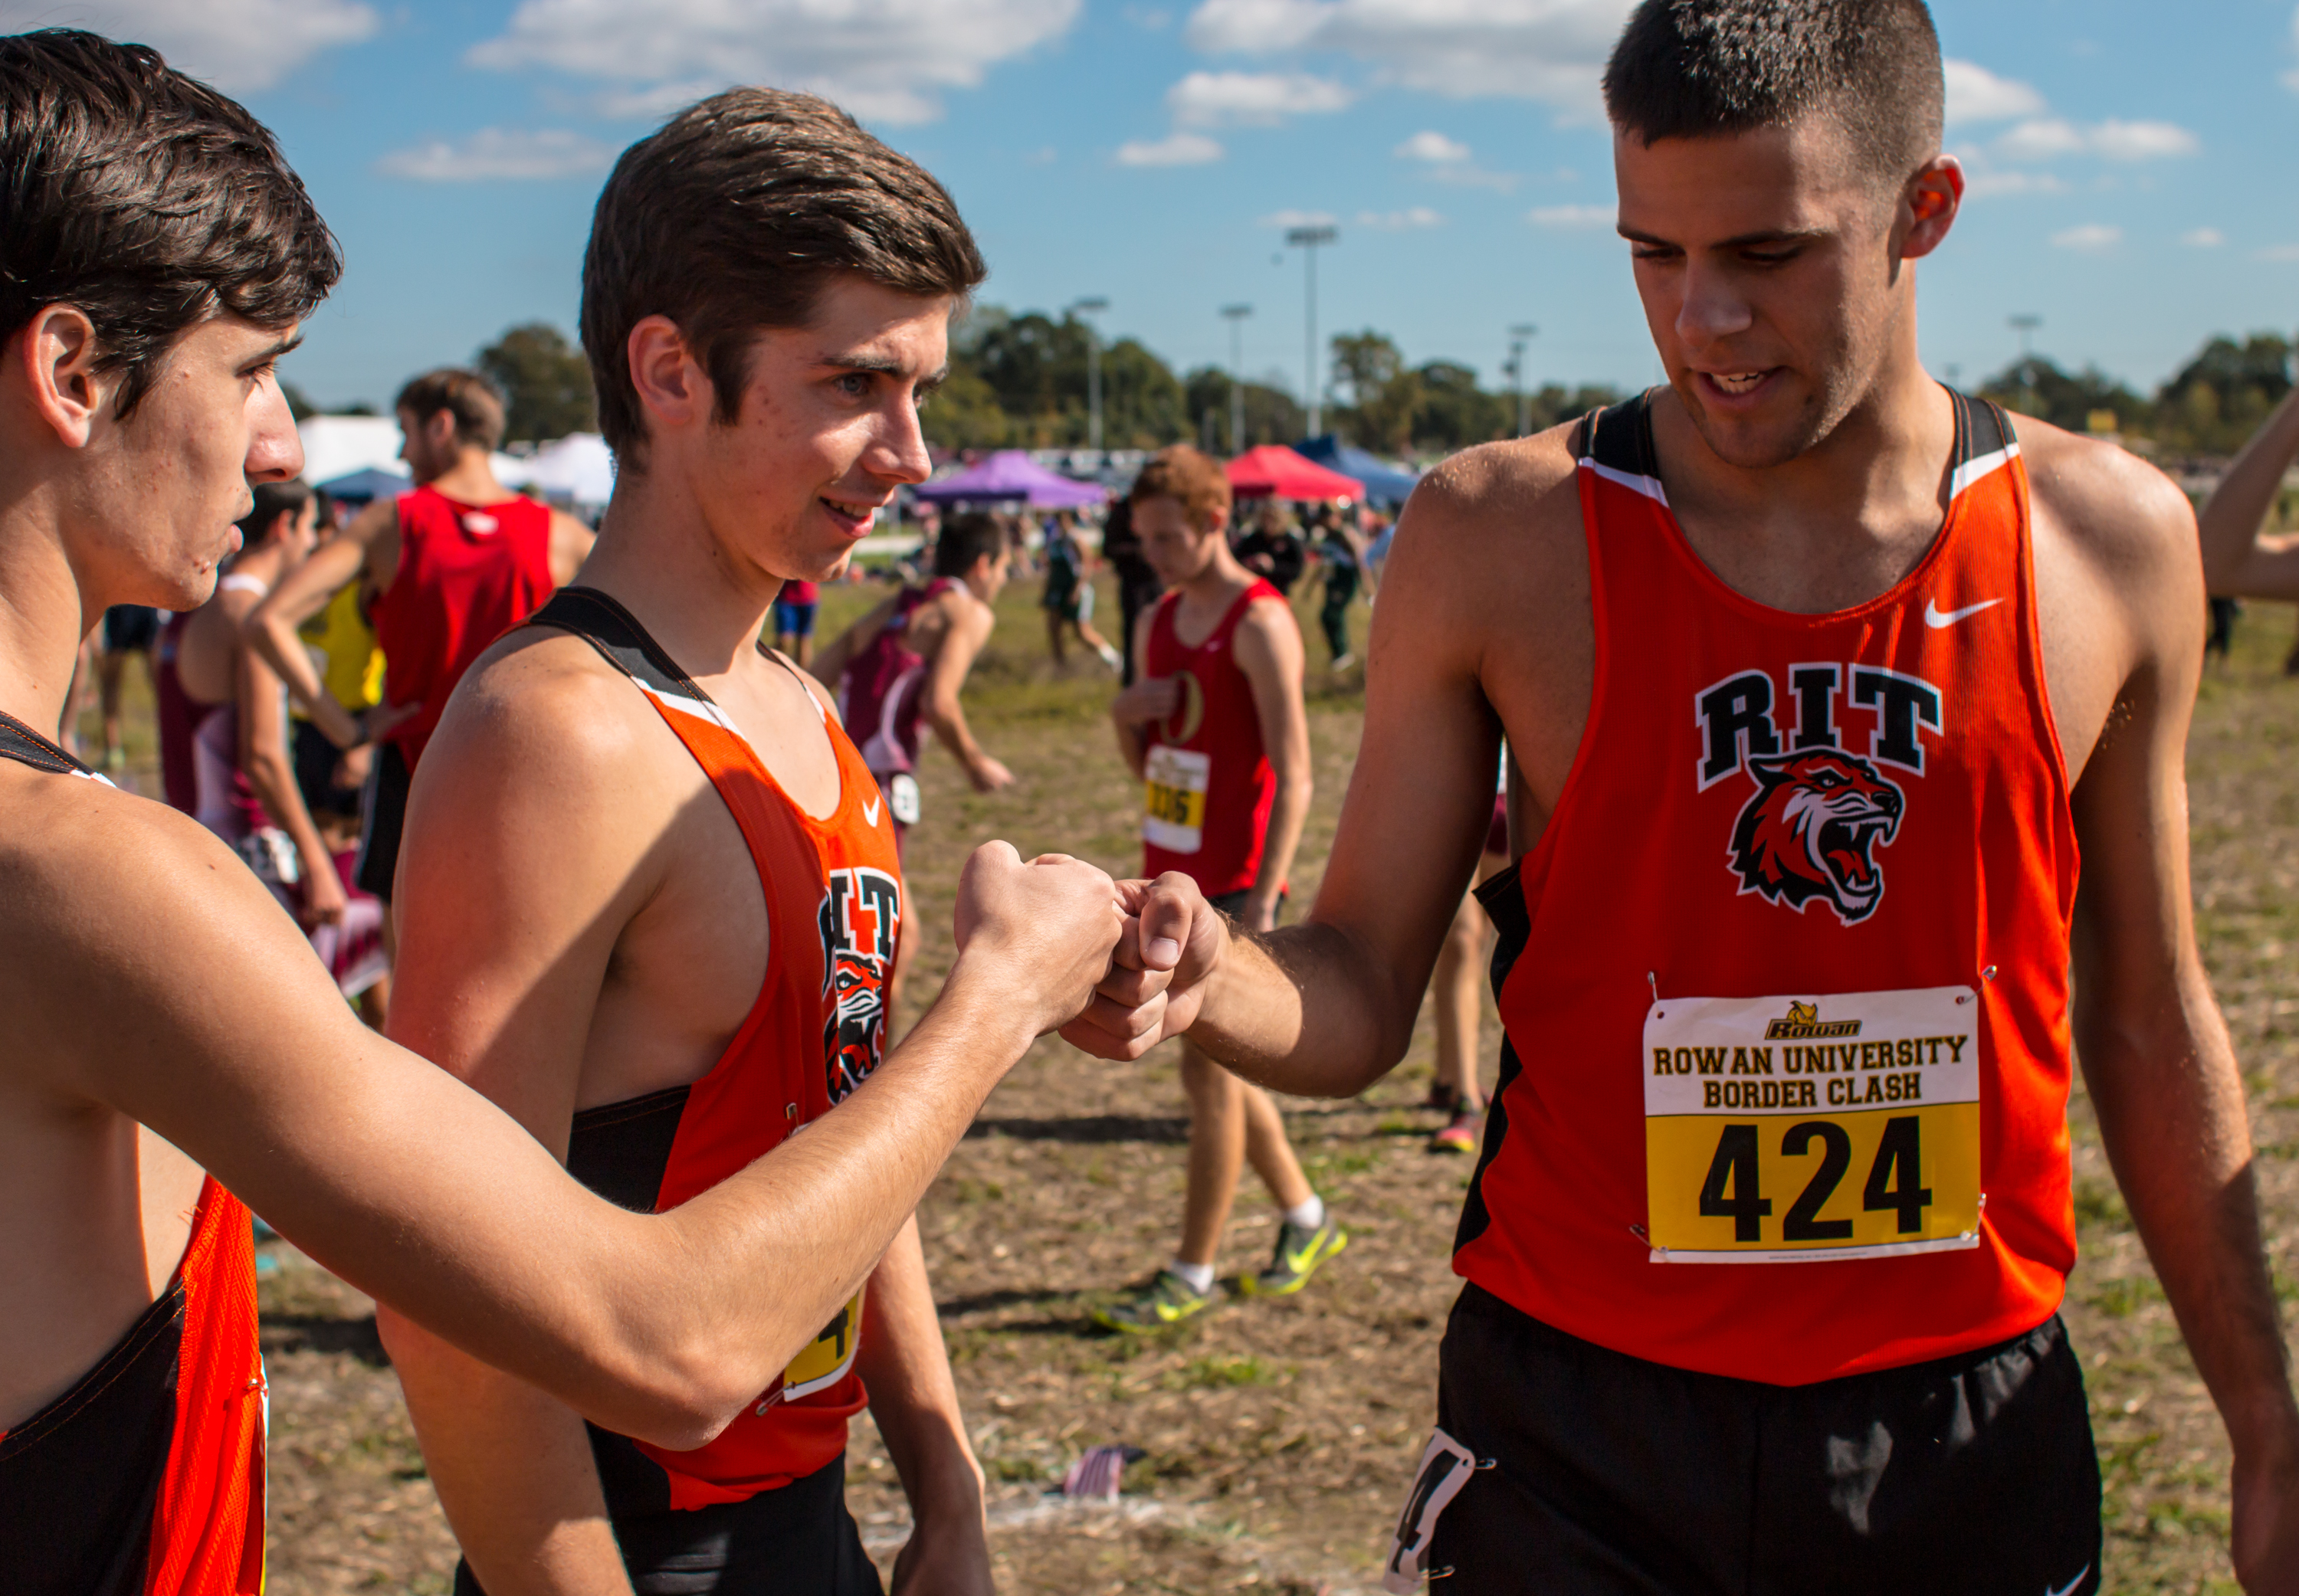 Grant Salk (424) of the Rochester Institute of Technology Tigers talks to teammates moments before starting the men's 8K varsity race on the West campus of Rowan University in Glassboro, N.J. on Oct. 15, 2016.